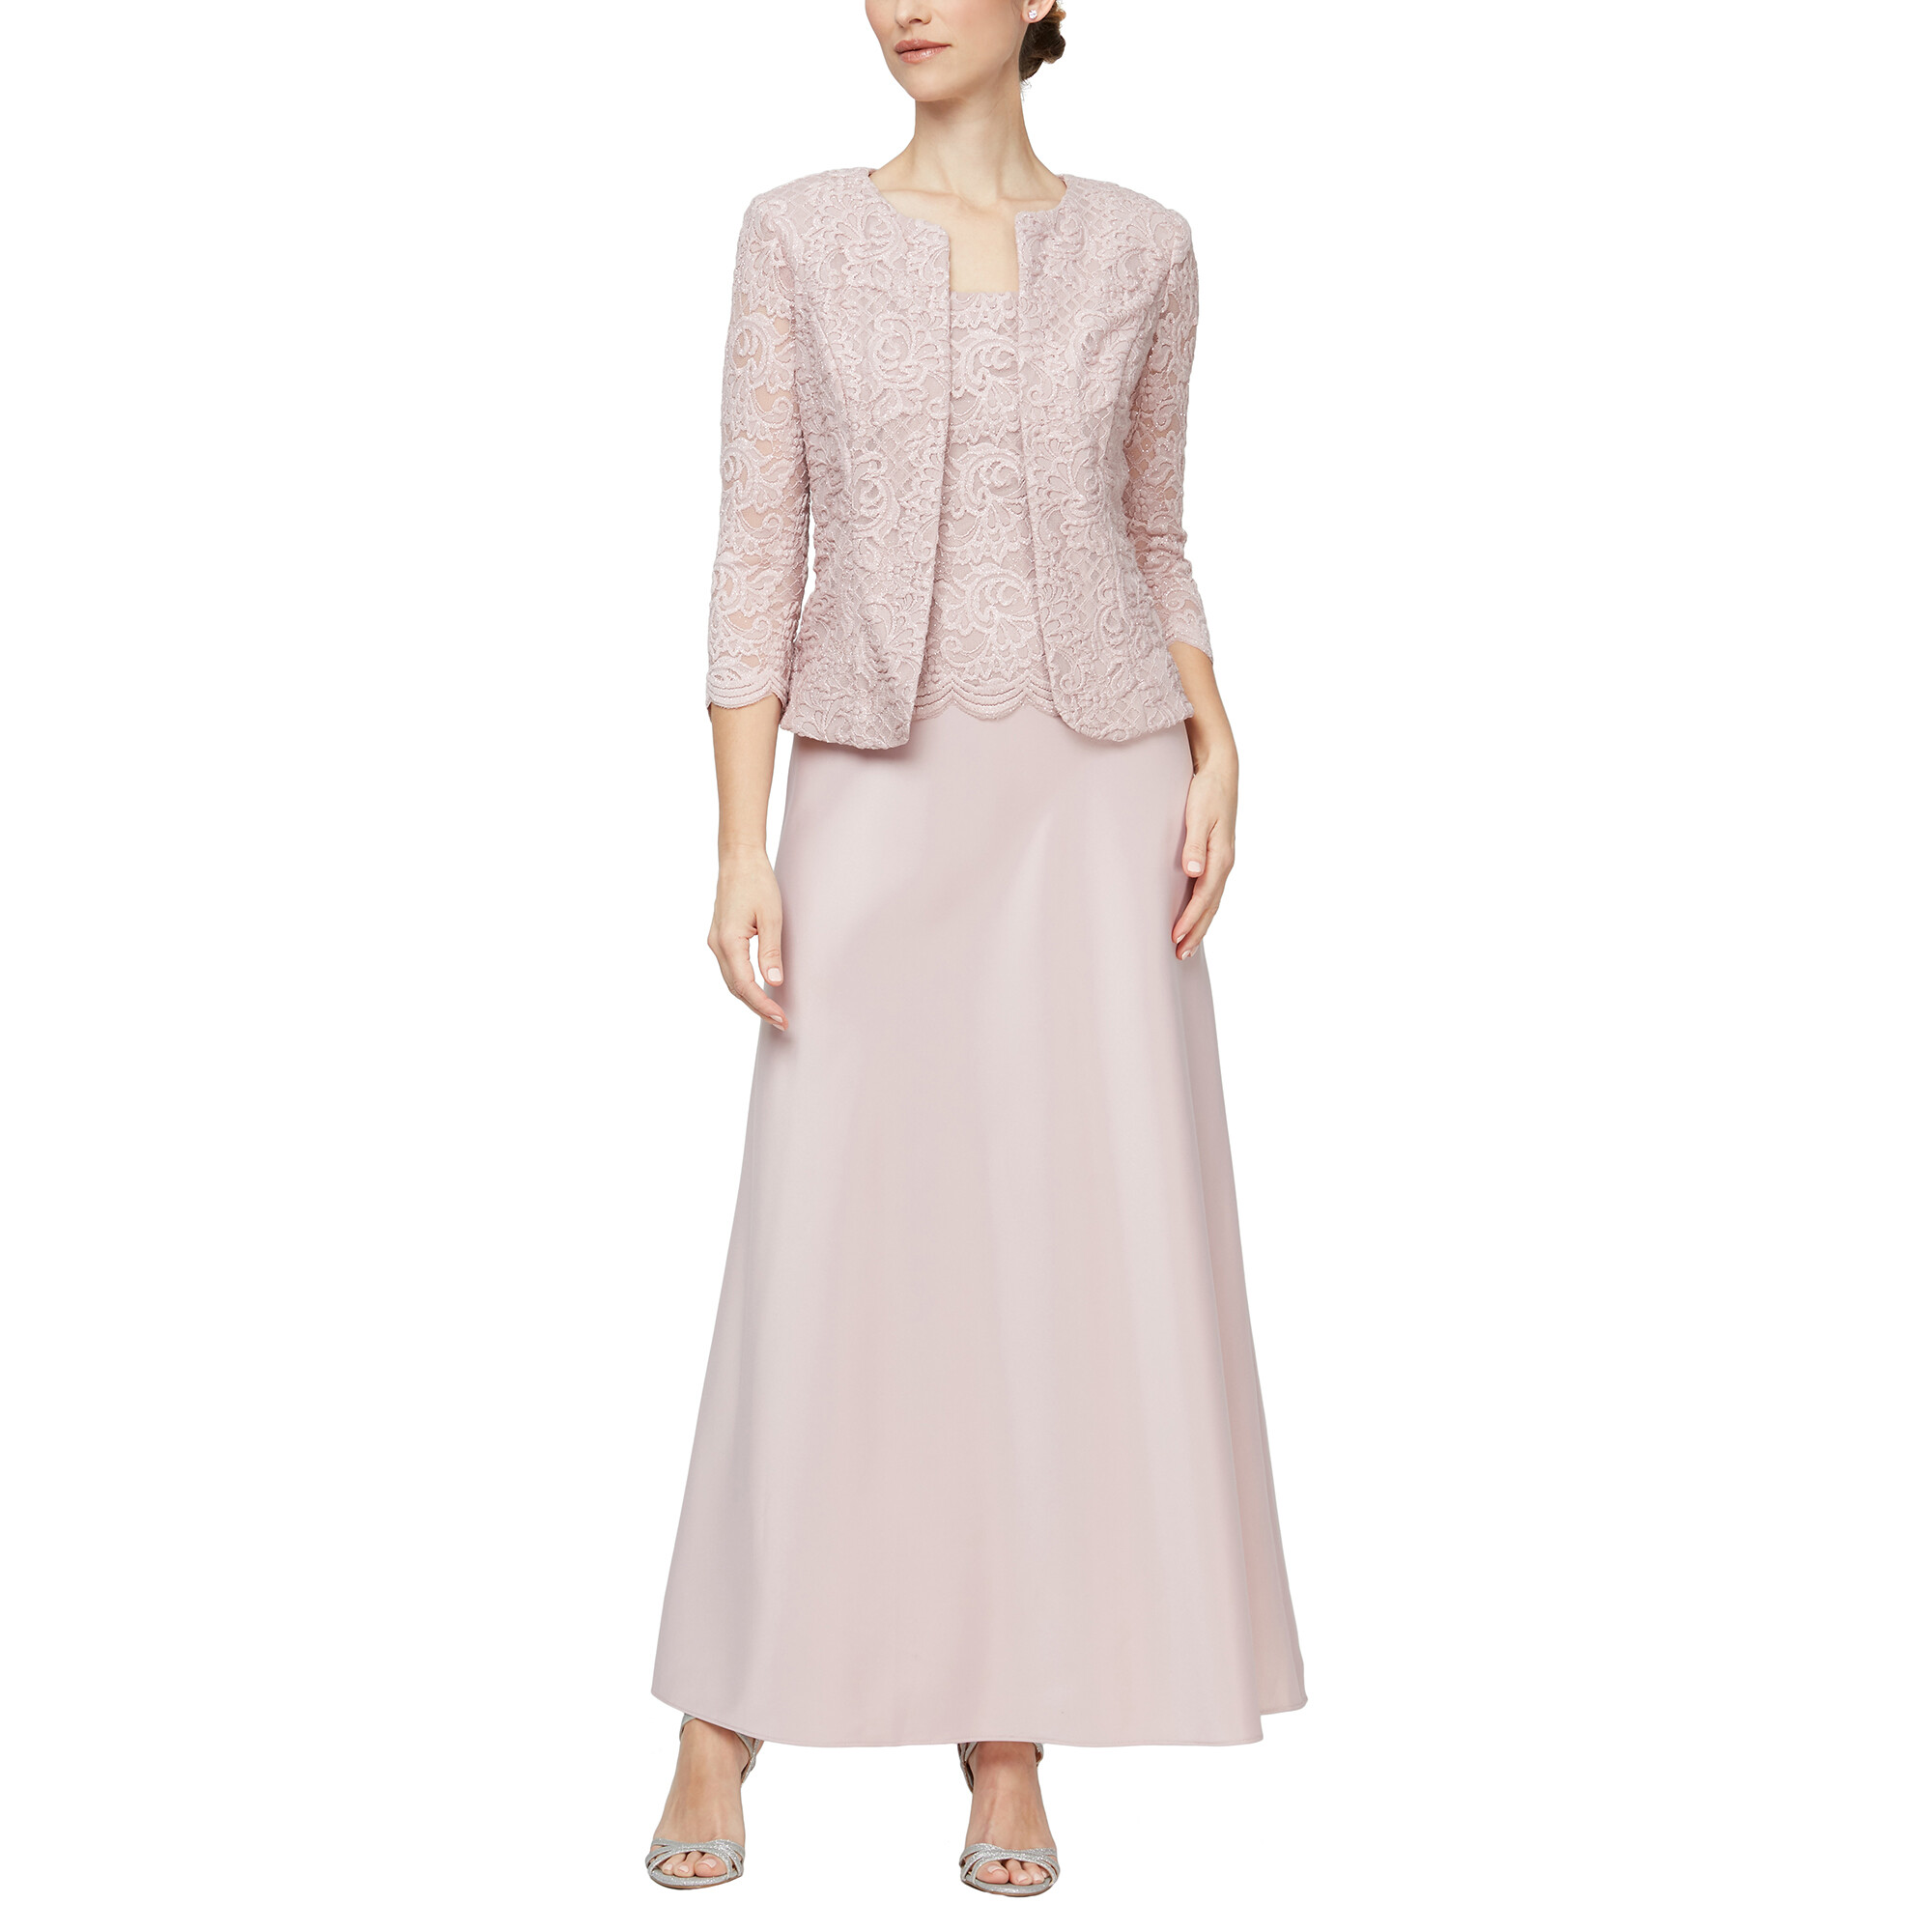 Incaltaminte Femei Levis Womens Long Mock Jacket Dress with Open Jacket Scoop Neck Bodice and Scallop Detail Blush